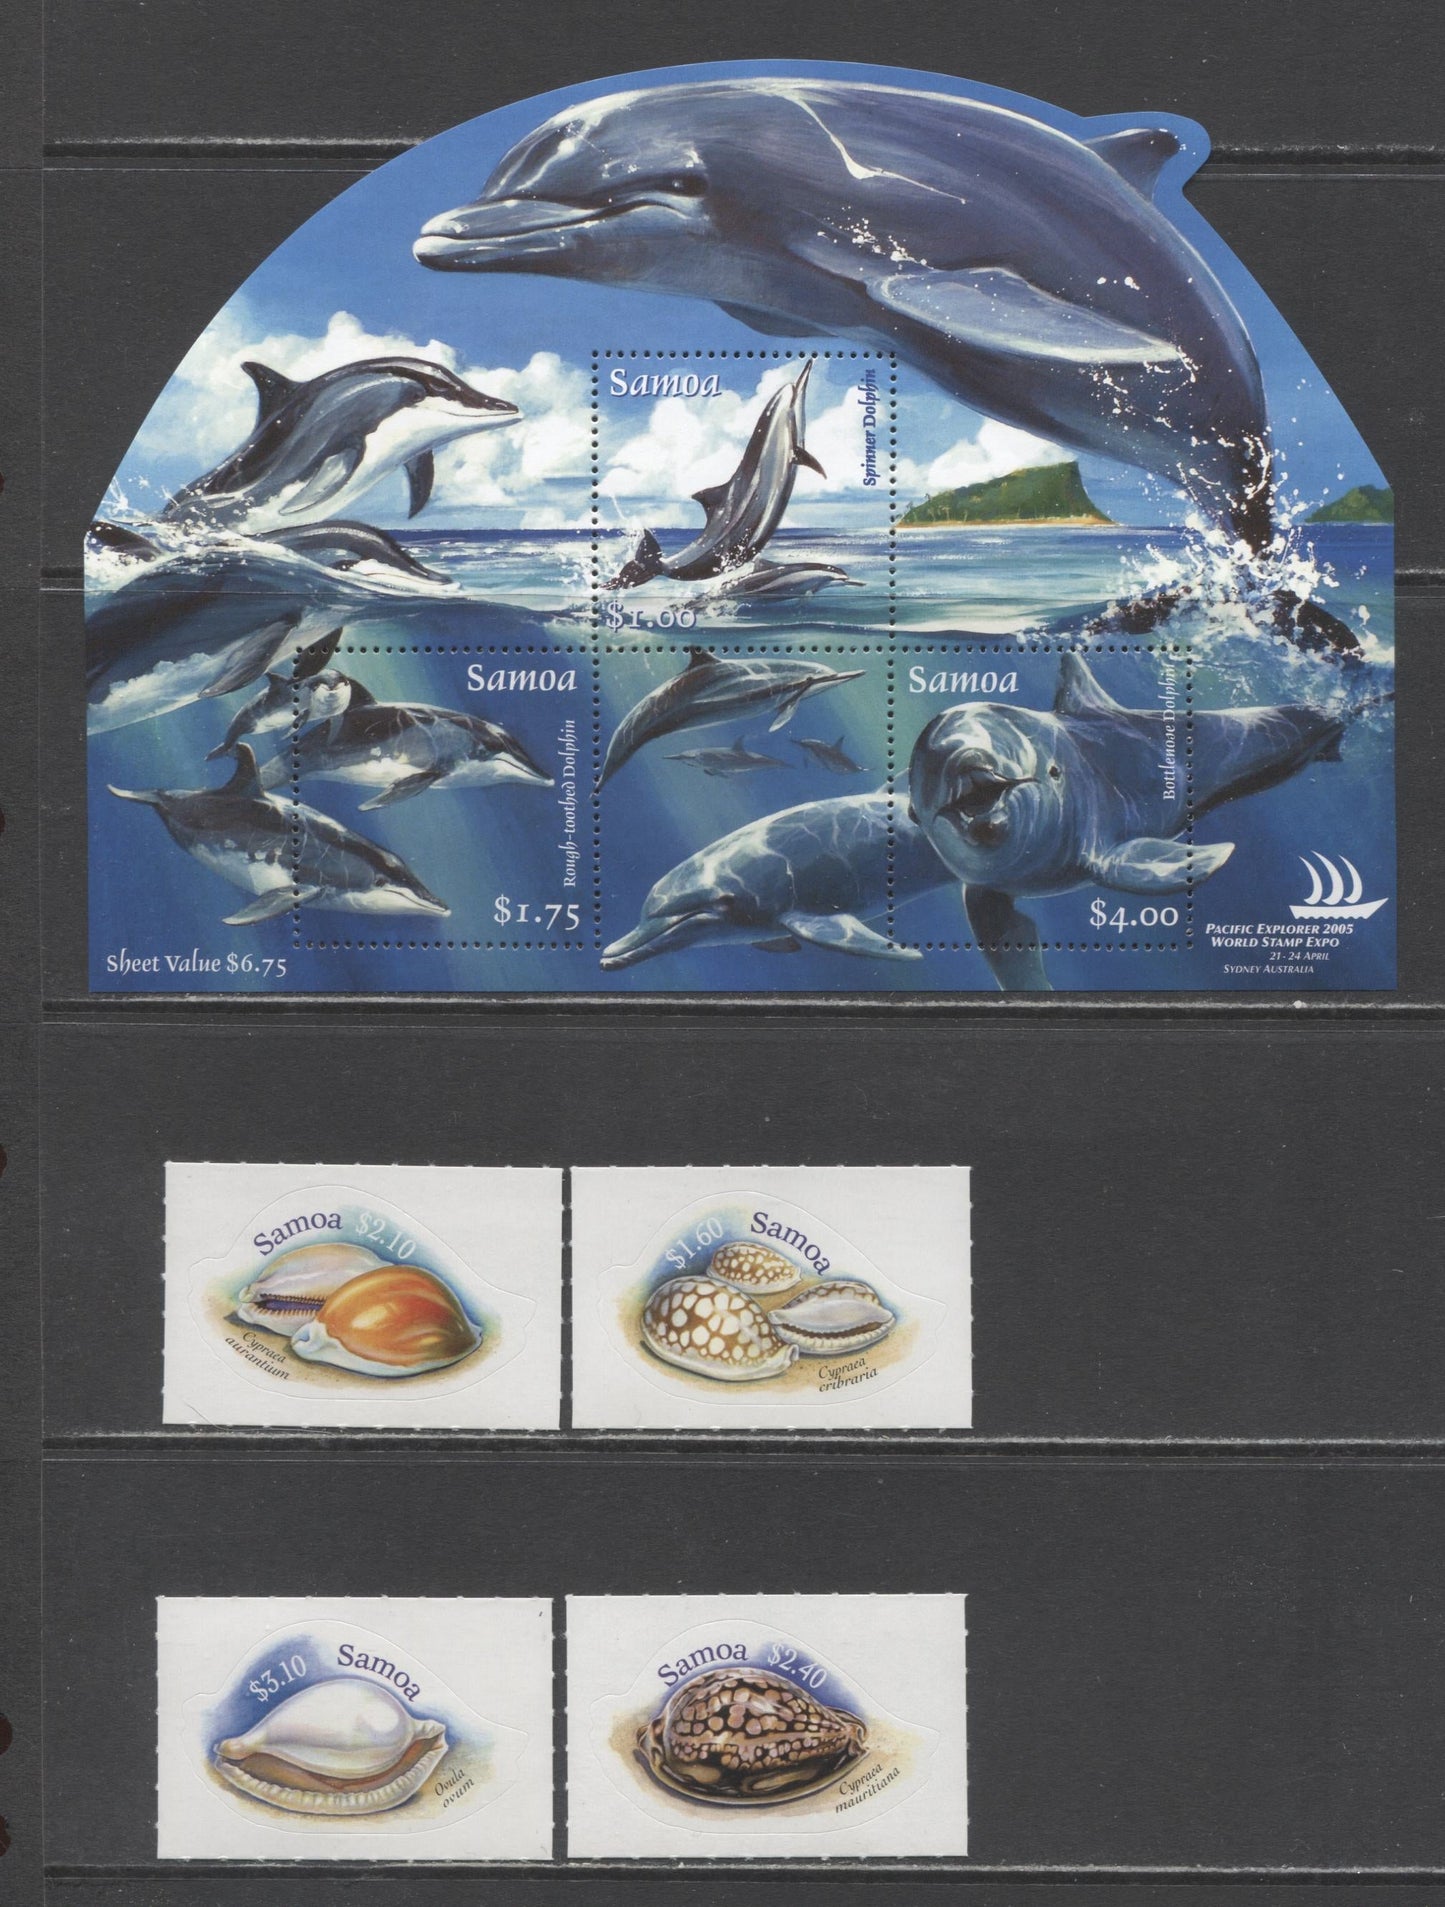 Lot 199 Samoa SC#1070/1096 2005-2006 Dolphins - Shell Issues, 5 VFNH Singles & Souvenir Sheet, Click on Listing to See ALL Pictures, 2017 Scott Cat. $12.5